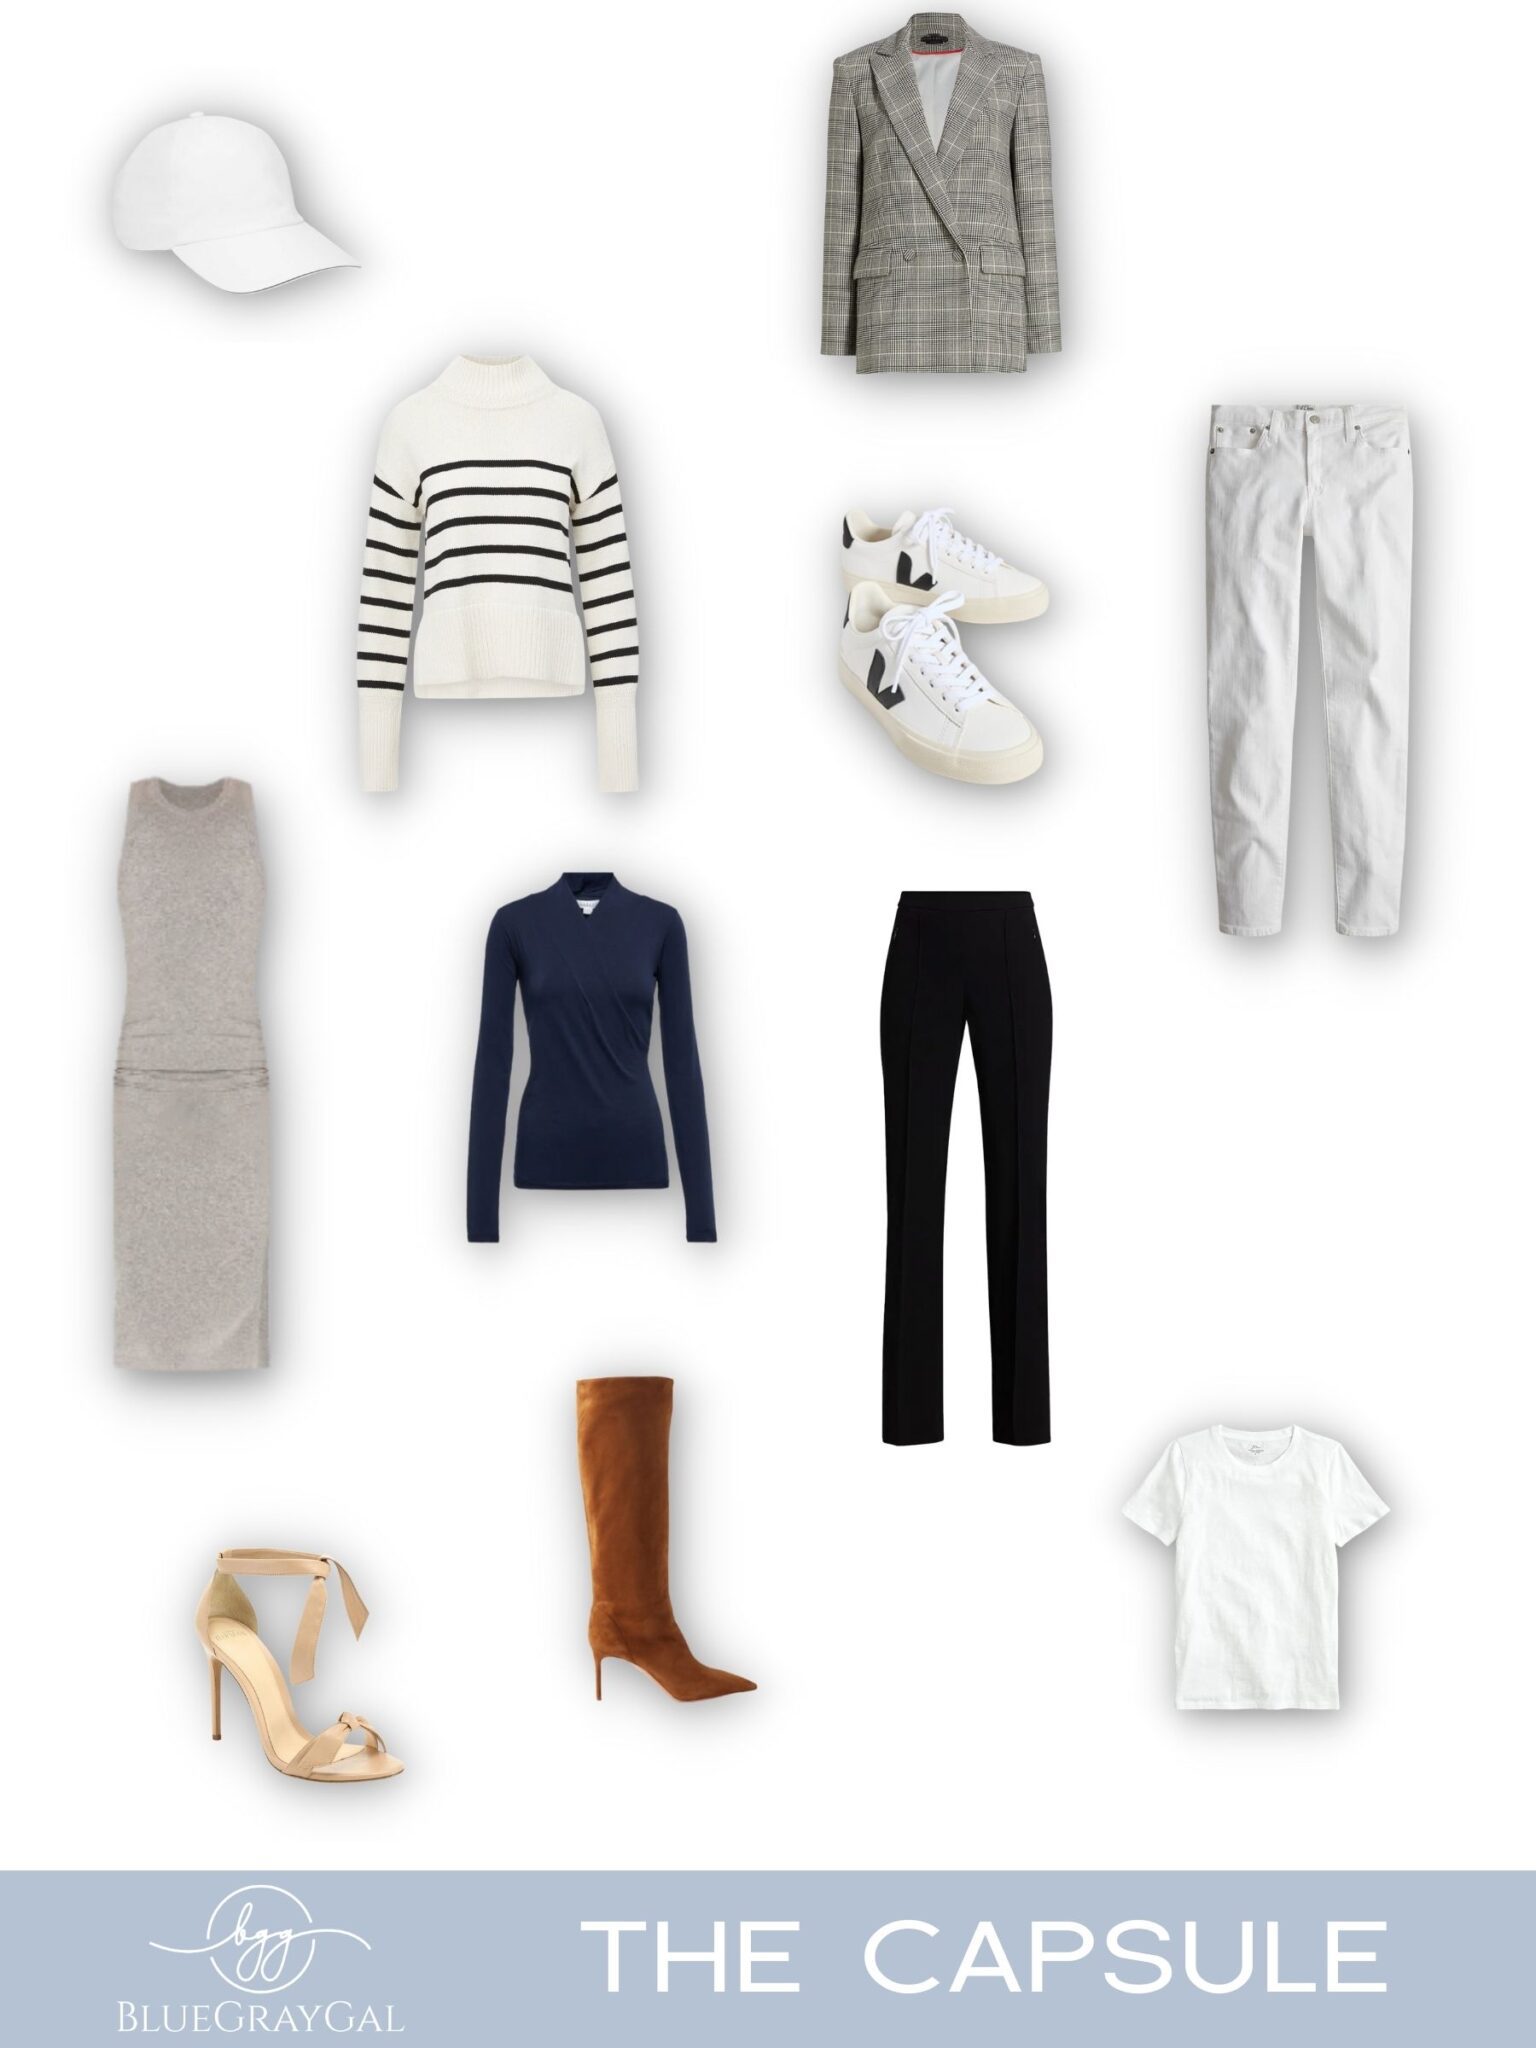 The 11 piece capsule wardrobe for travel.